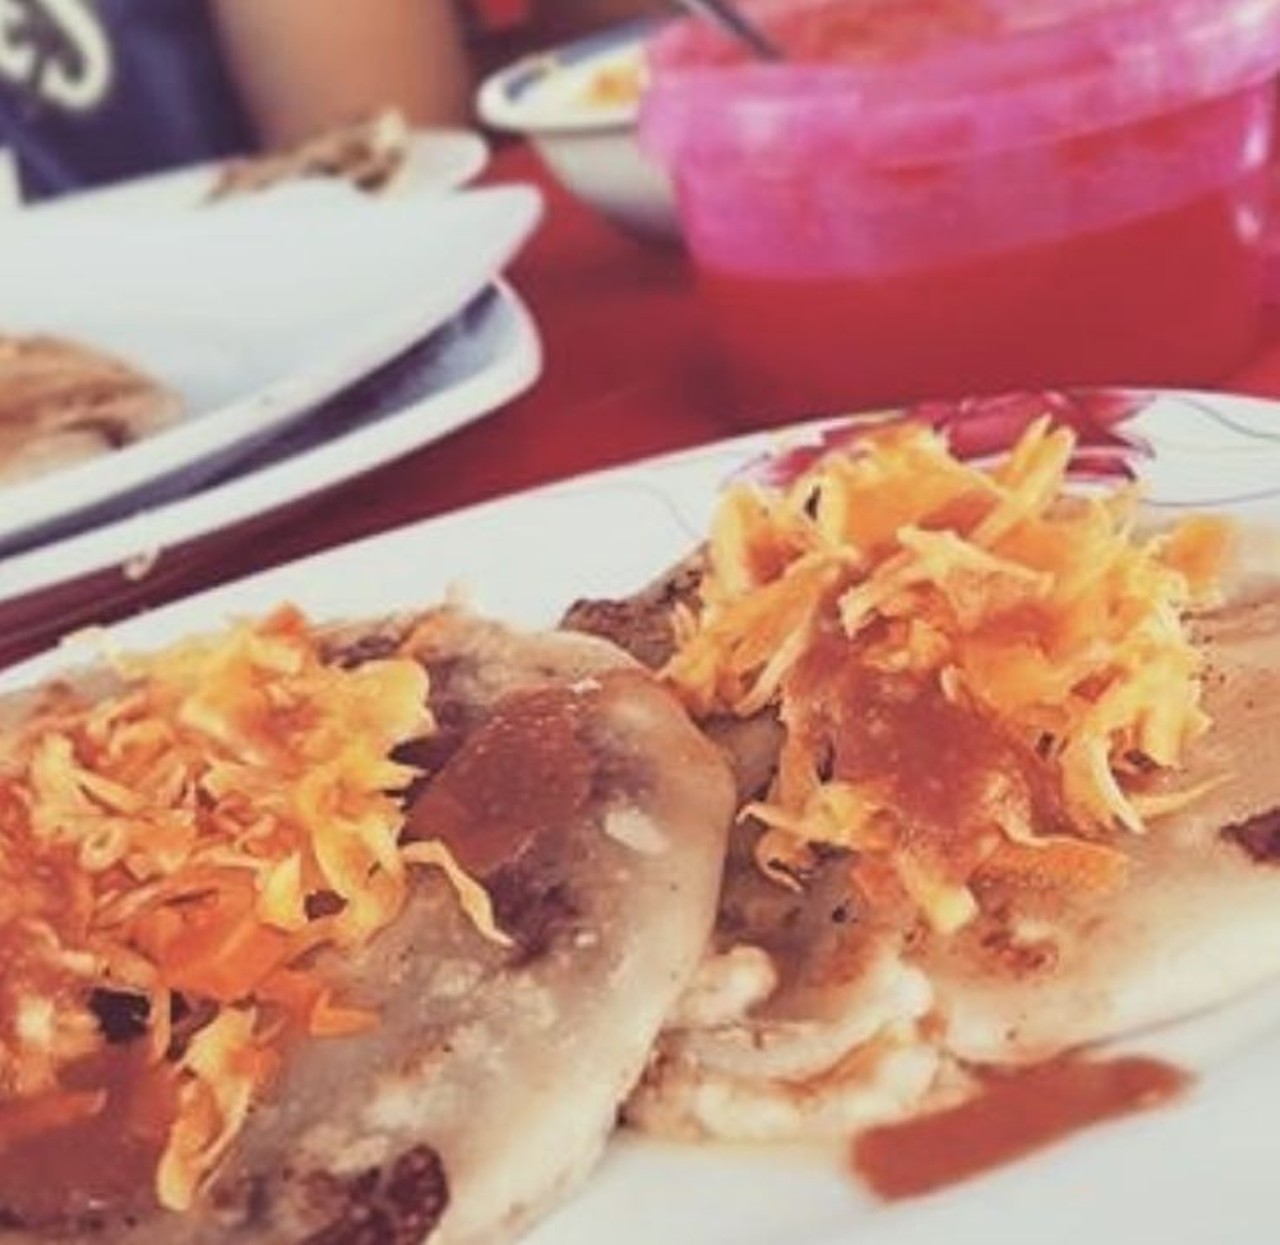 Pupsueria Maya  
2108 Michigan Ave., Kissimmee, 407-944-0708
This Salvadoran joint claims to have the best Pupusas Mayas and the Internet seems to agree. They also have everything from tamales to yuca fritas. 
Photo via papucla10/ Instagram